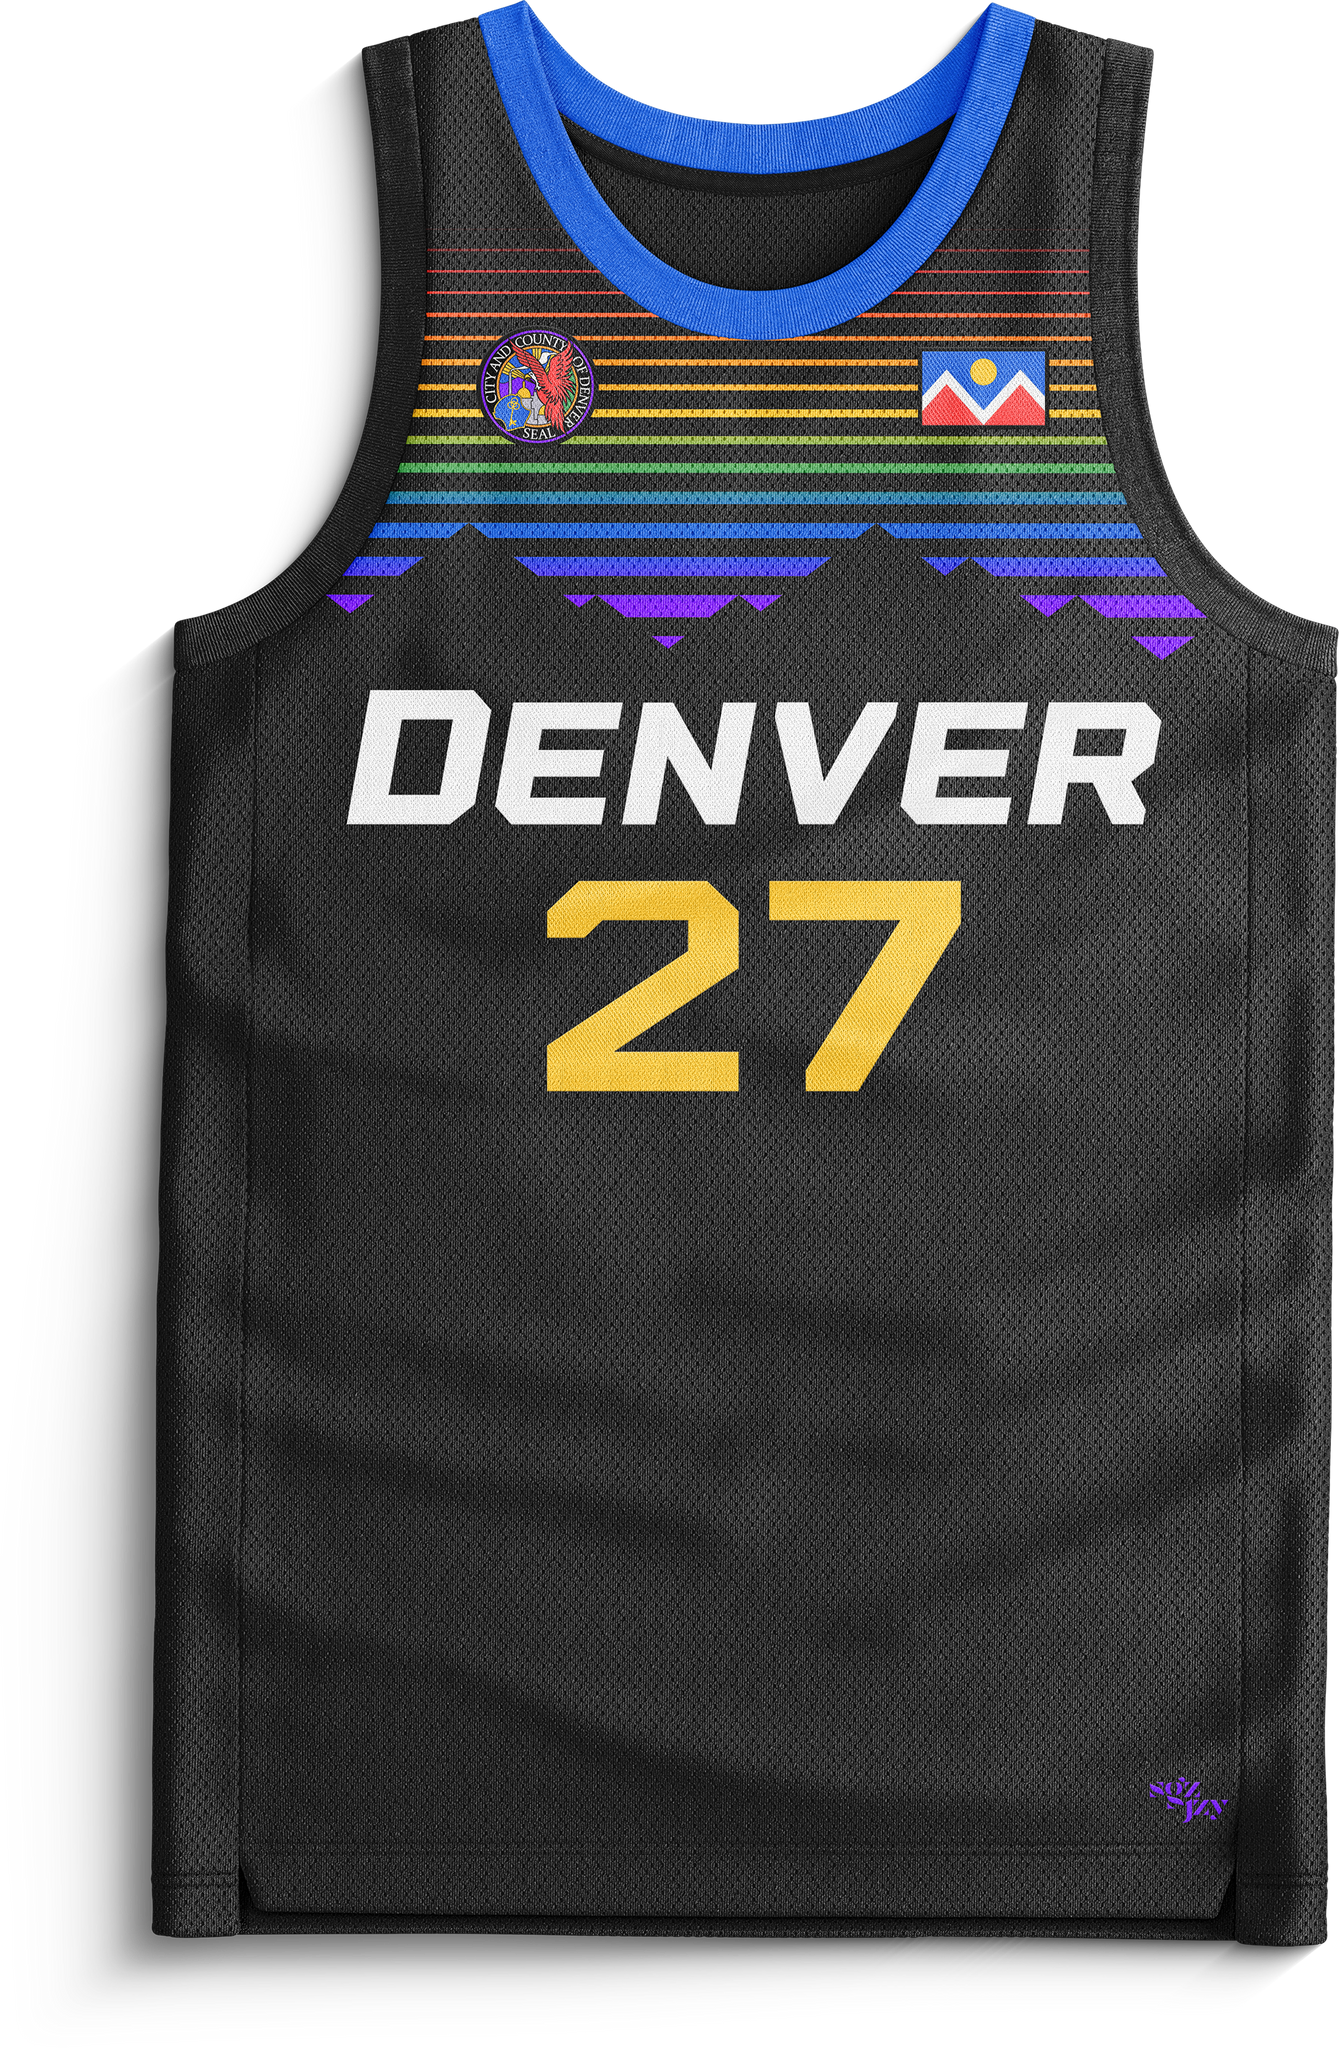 nuggets rainbow jersey products for sale